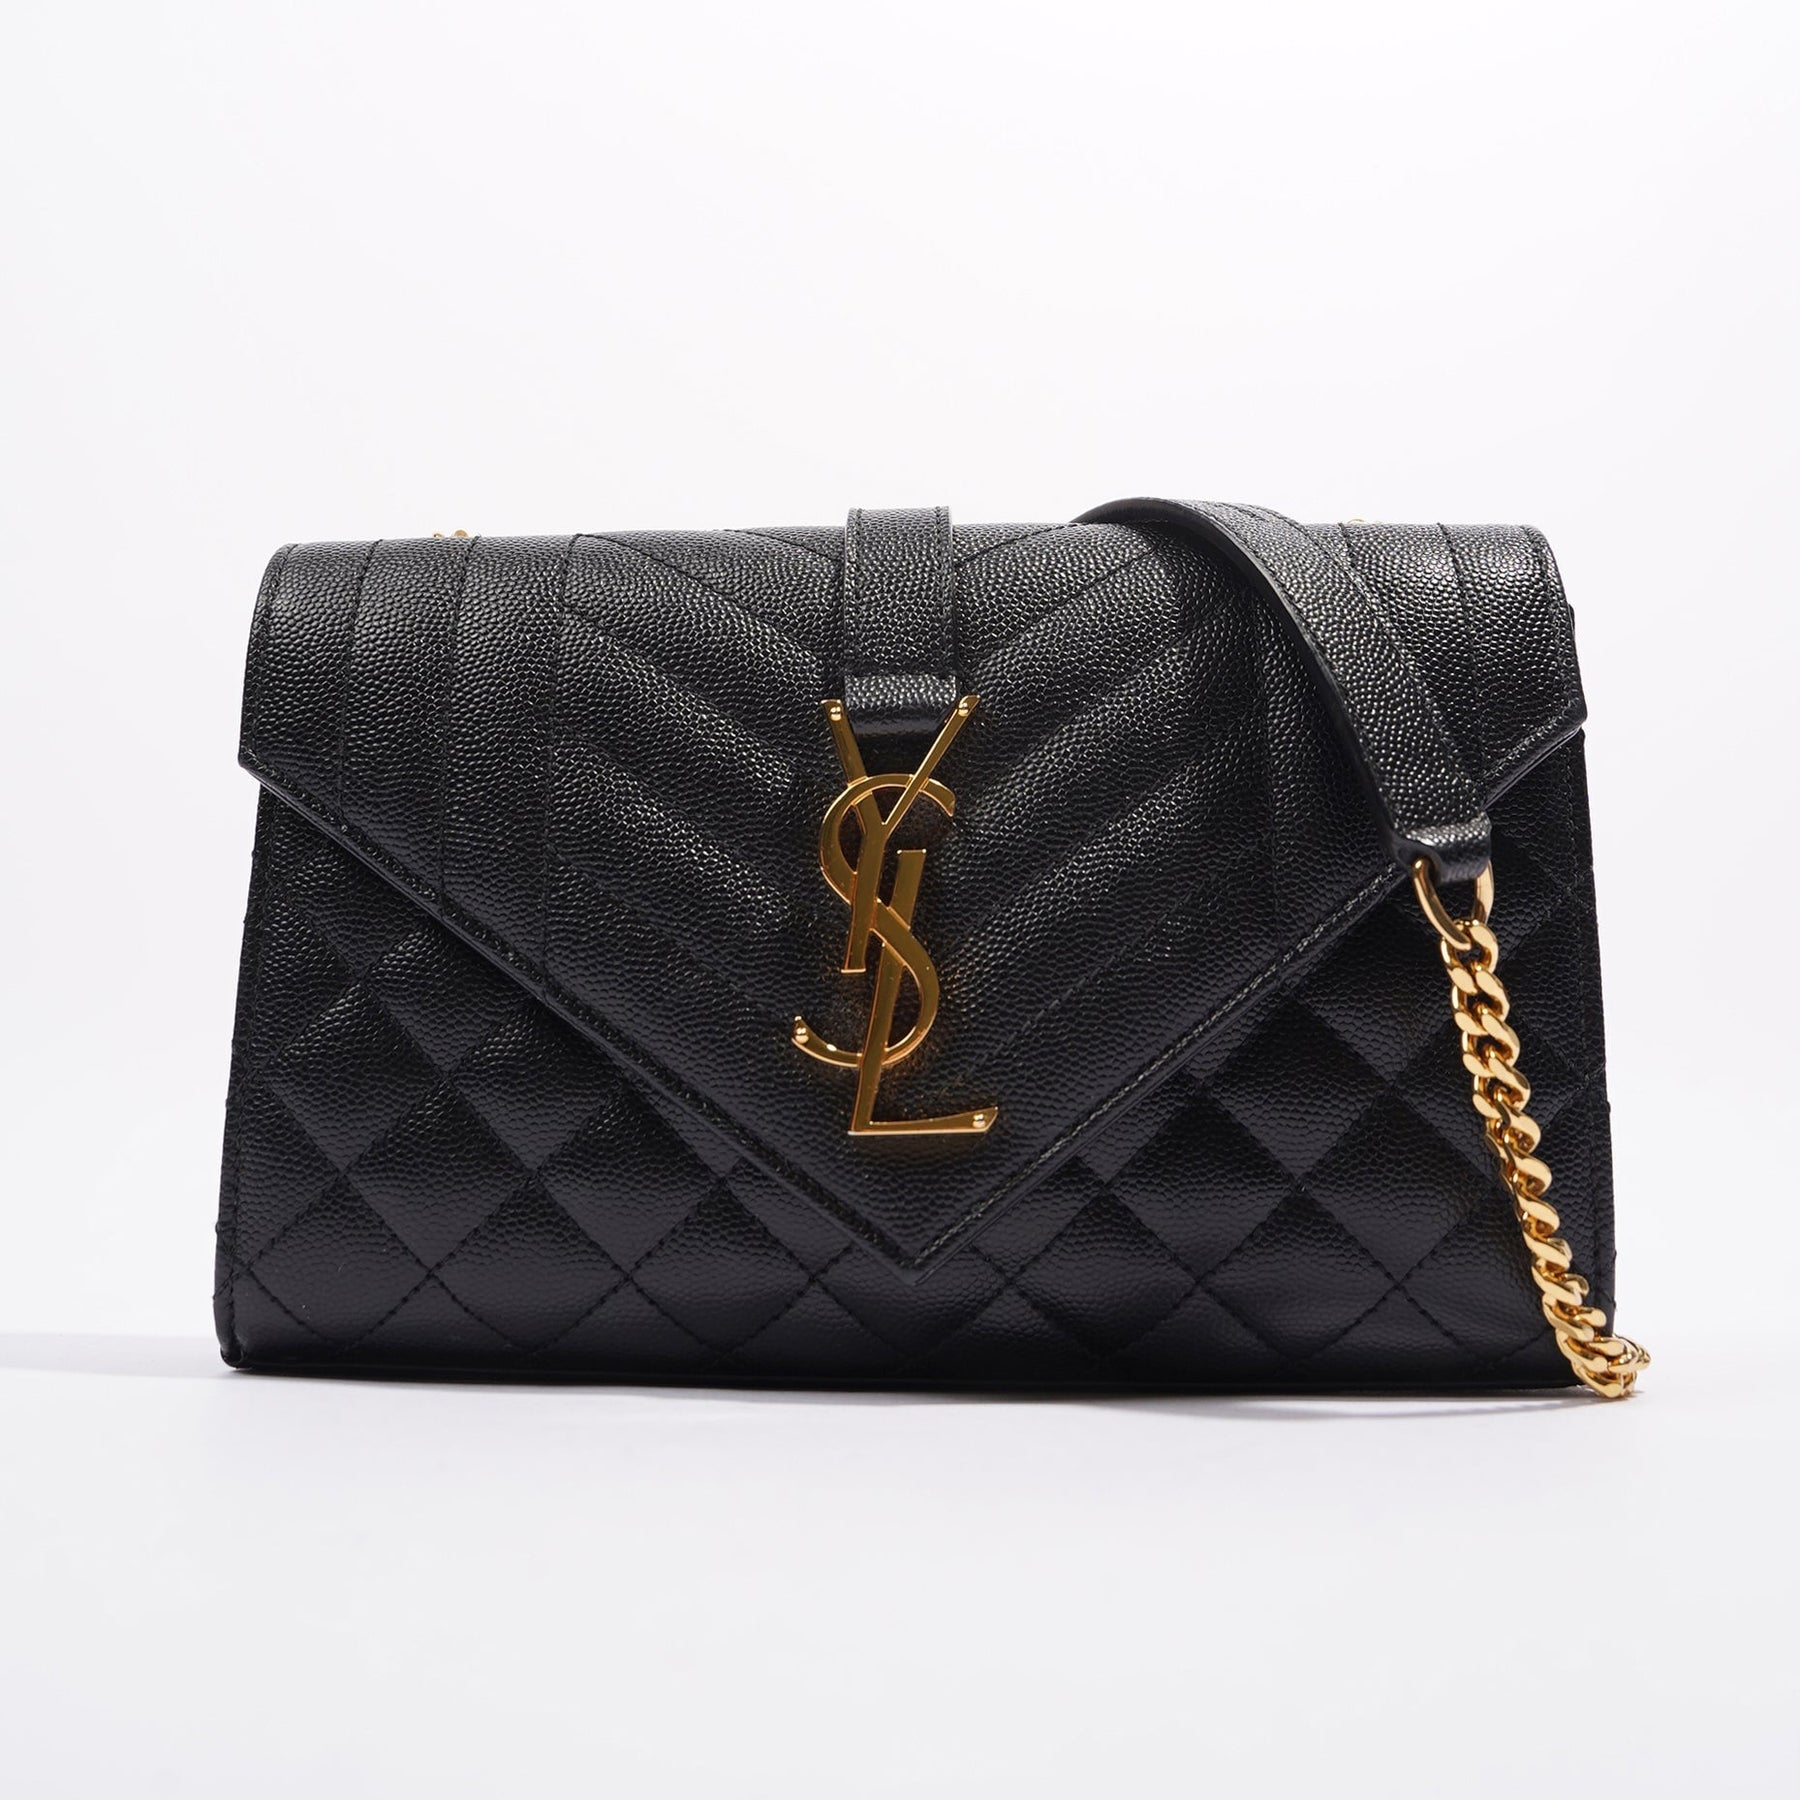 MY TOP 5 MOST USED BAGS! Ft: Louis Vuitton, YSL, Ferragamo, Chanel… 